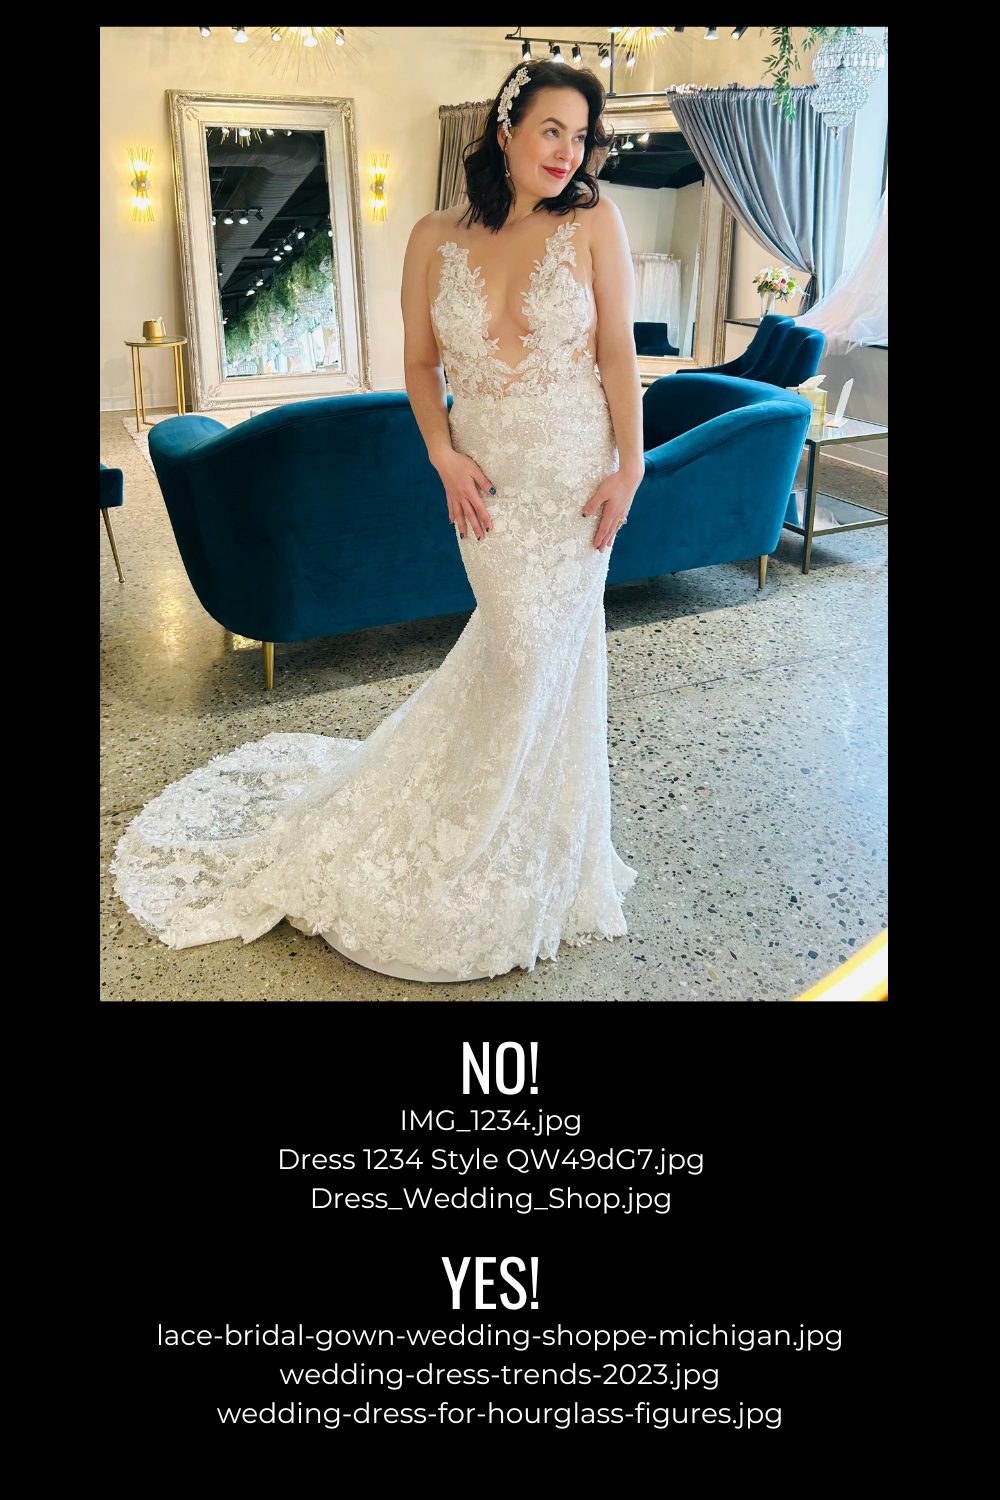 Bride to be wearing a white lace bridal gown with a short train and a plunging neckline standing near a blue sofa. Caption shows examples of good and bad file names.